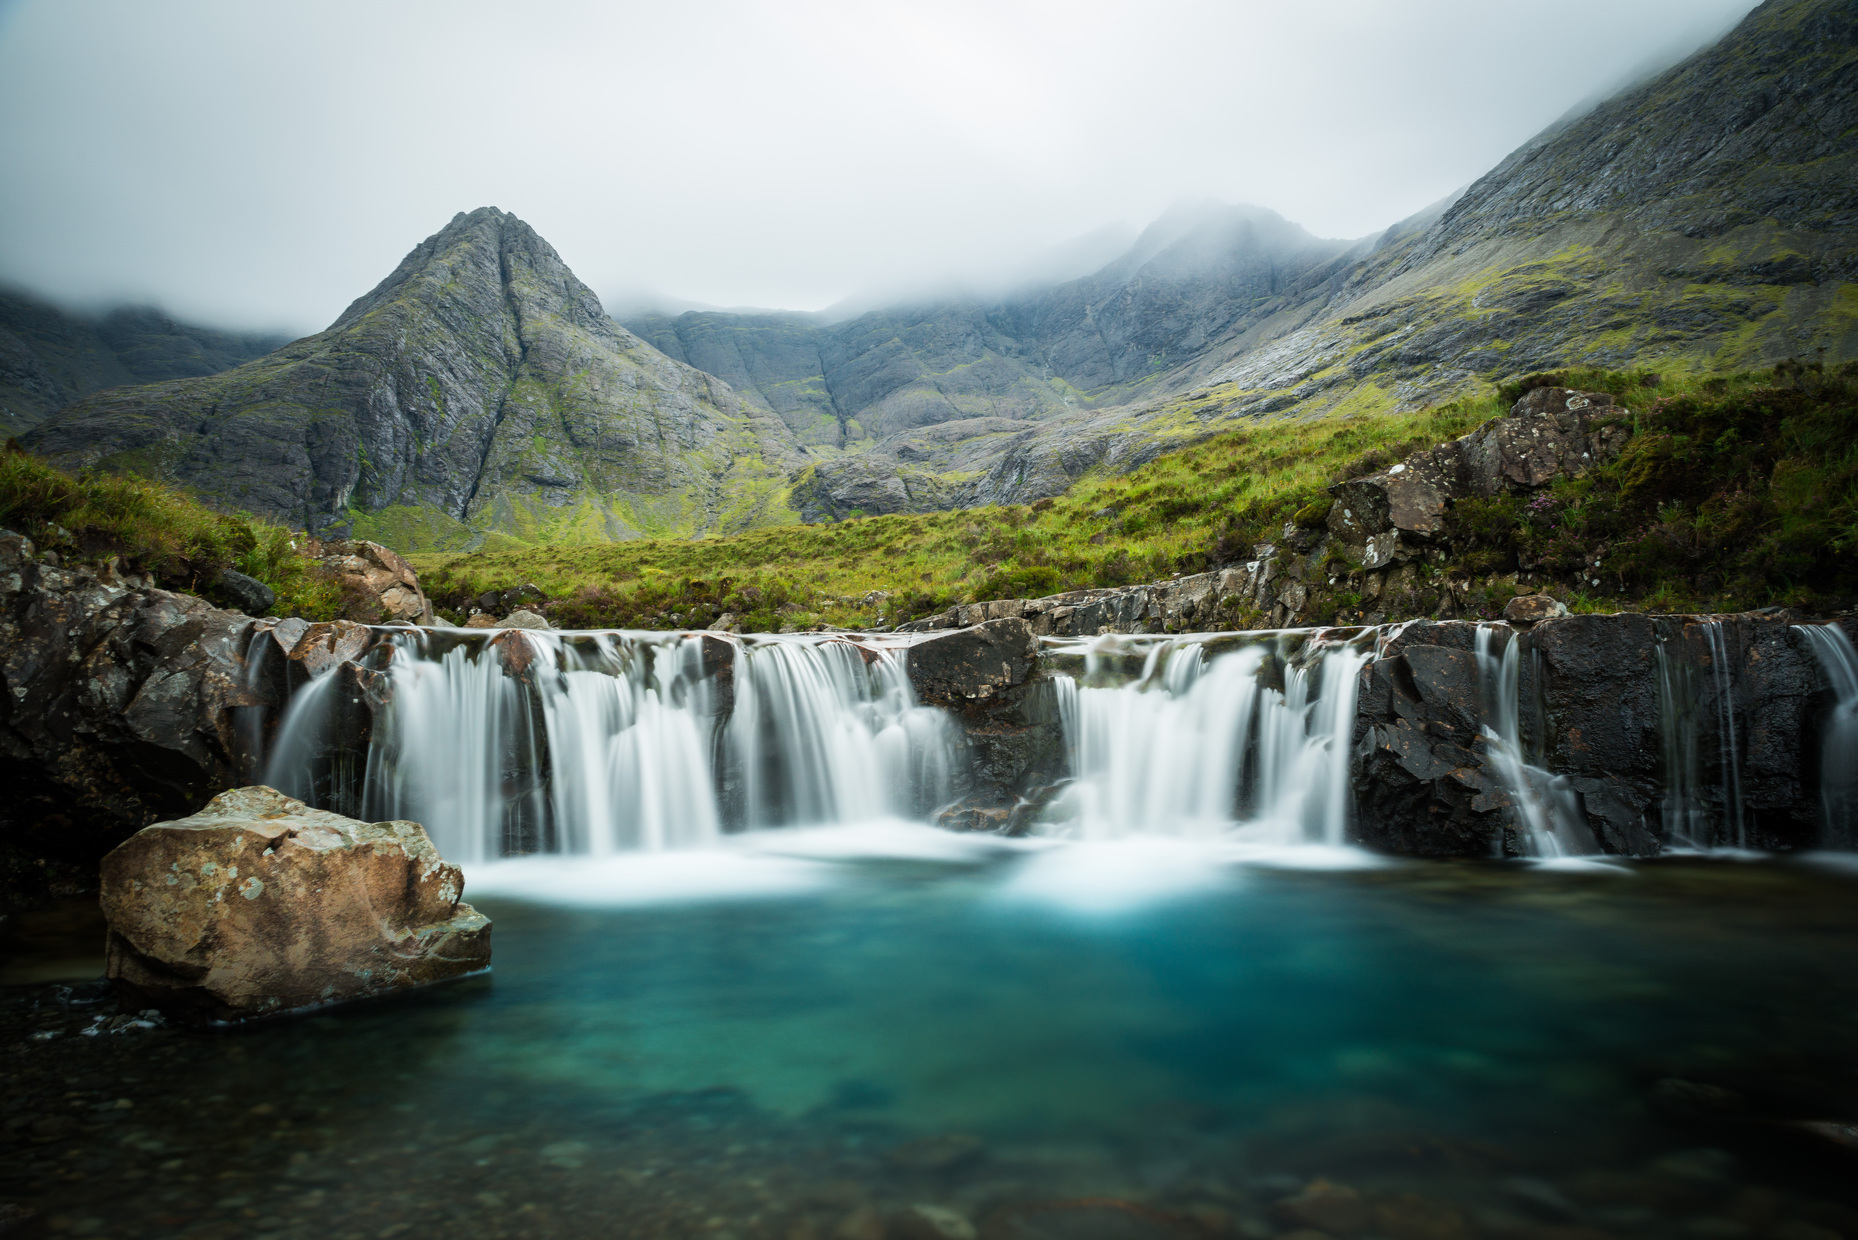 The Isle of Skye is full of legends and places said to have magical properties. The <a href="https://hiddenscotland.co/the-magical-waters-by-the-sligachan-bridge/" rel="noreferrer noopener">Sligachan River</a>, for instance, supposedly grants eternal beauty to those who rinse their faces in its bewitched waters. Near the village of Glenbrittle, <a href="https://www.atlasobscura.com/places/fairy-glen" rel="noreferrer noopener">Fairy Glen</a> lies in a lush valley where wishes are granted amid the enchanting, crystal-clear waters of the <a href="https://www.isleofskye.com/skye-guide/top-ten-skye-walks/fairy-pools" rel="noreferrer noopener">Fairy Pools</a>.